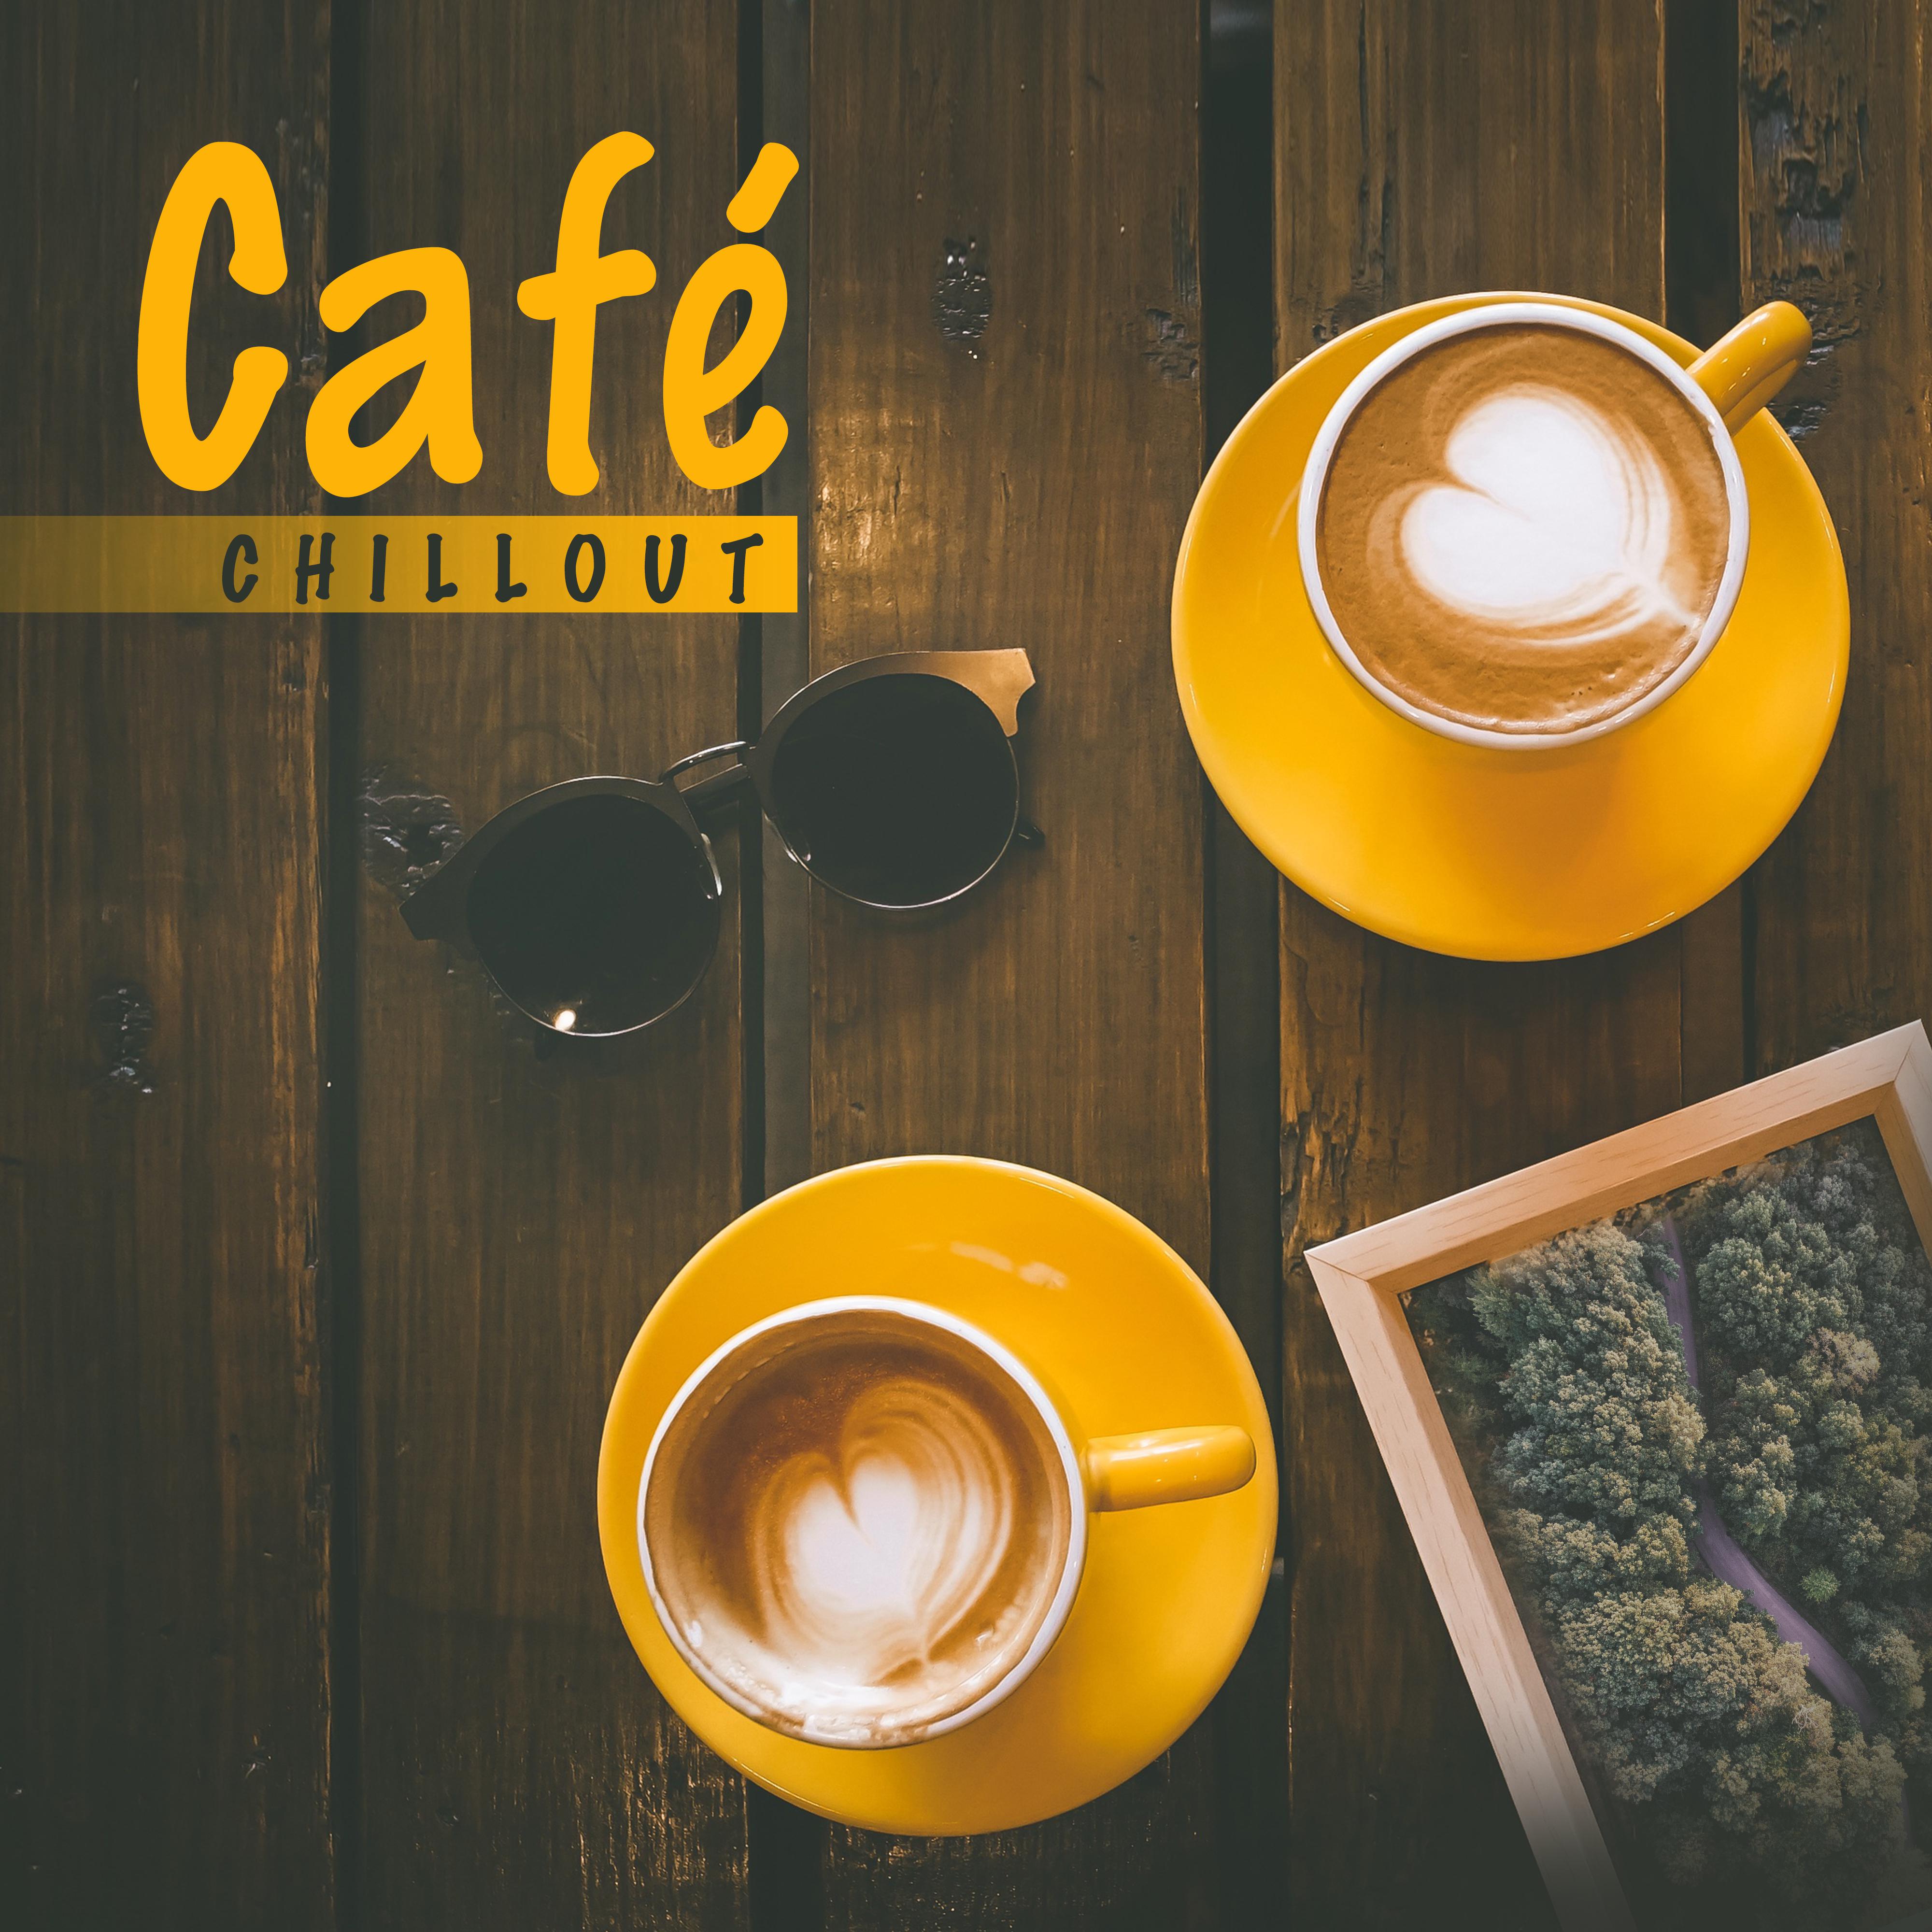 Café Chillout – Essential Chill Out 2017, Cafe Music, Summer Chill, Relaxed Lounge